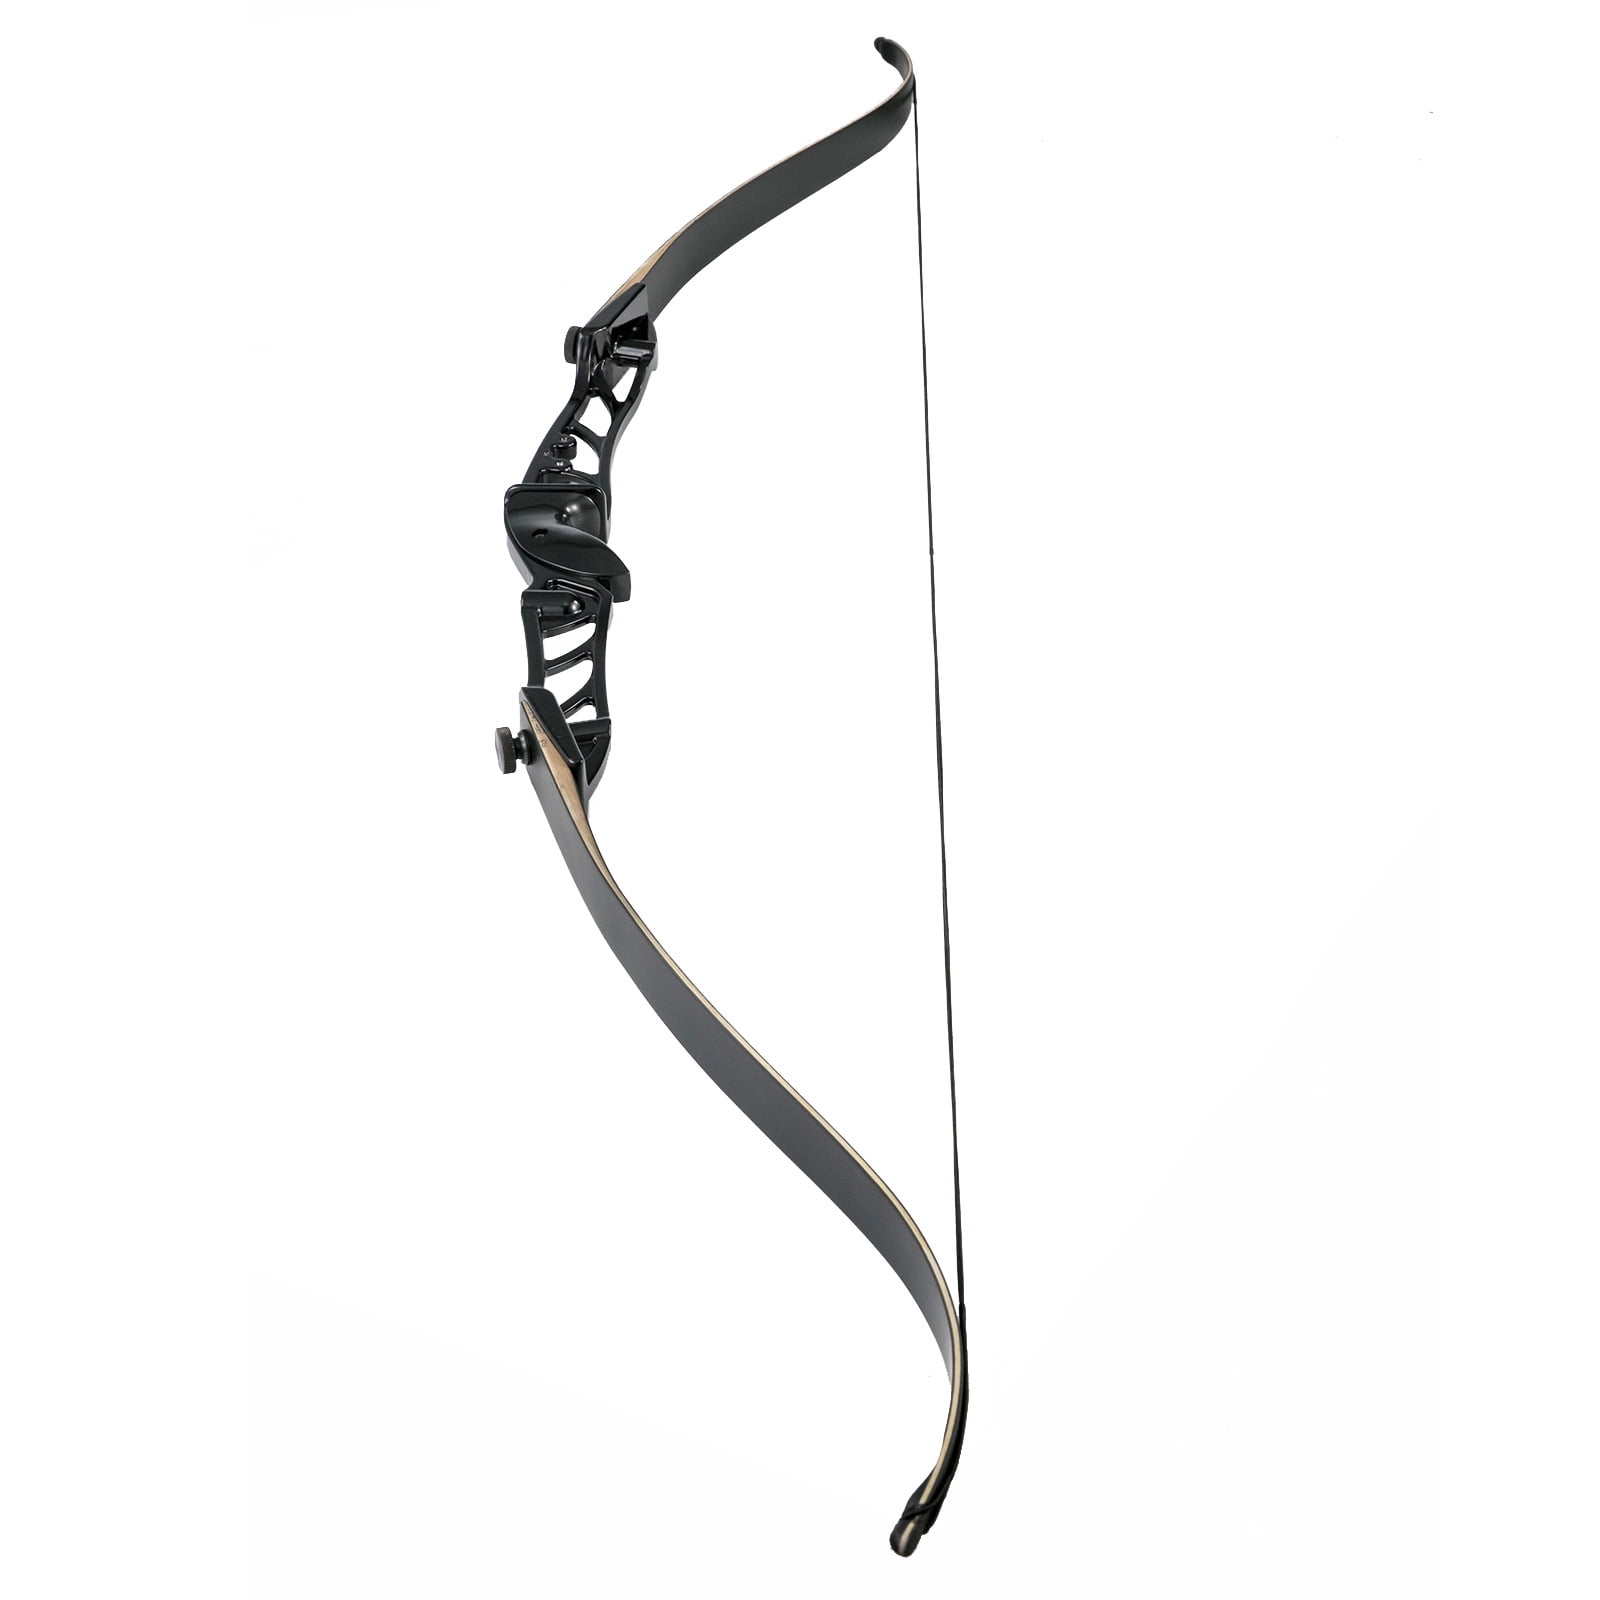  Lamehfyo Archery Bowfishing Arrow Rest Aluminum Alloy Arrow  Rest Right and Left Hand Use Archery Arrow Rest for Compound Bow Recurve Bow  Fishing Accessory (Black) : Sports & Outdoors